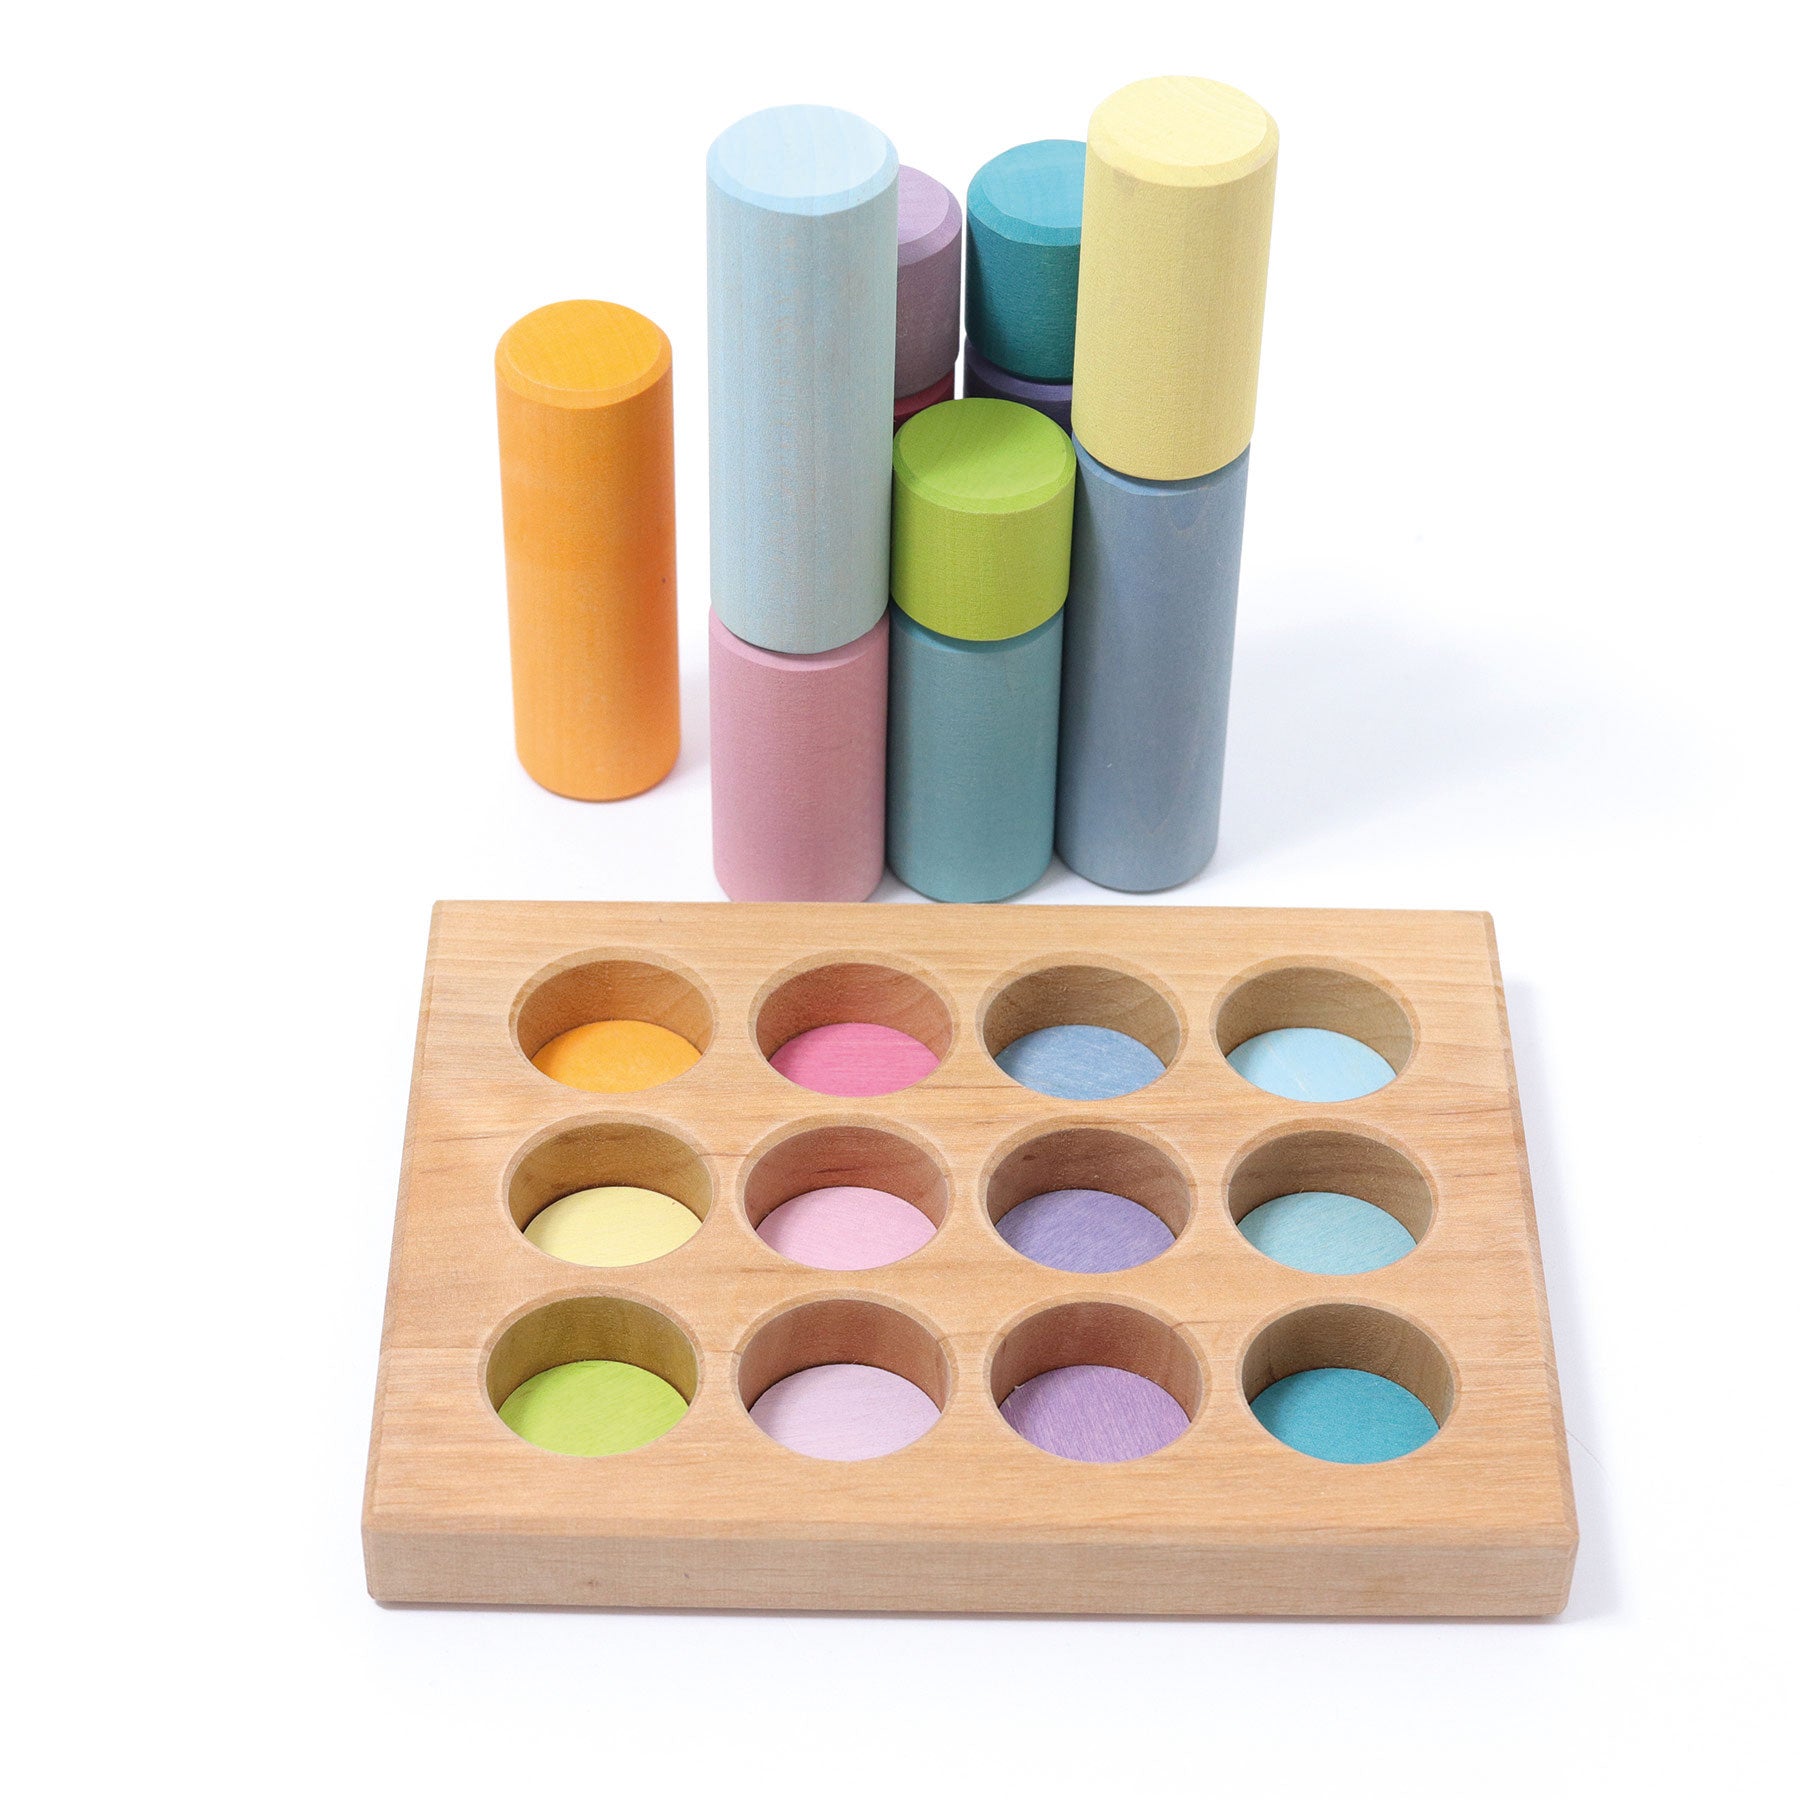 Grimm's Stacking Game Small Pastel Rollers - Bueno Blocks